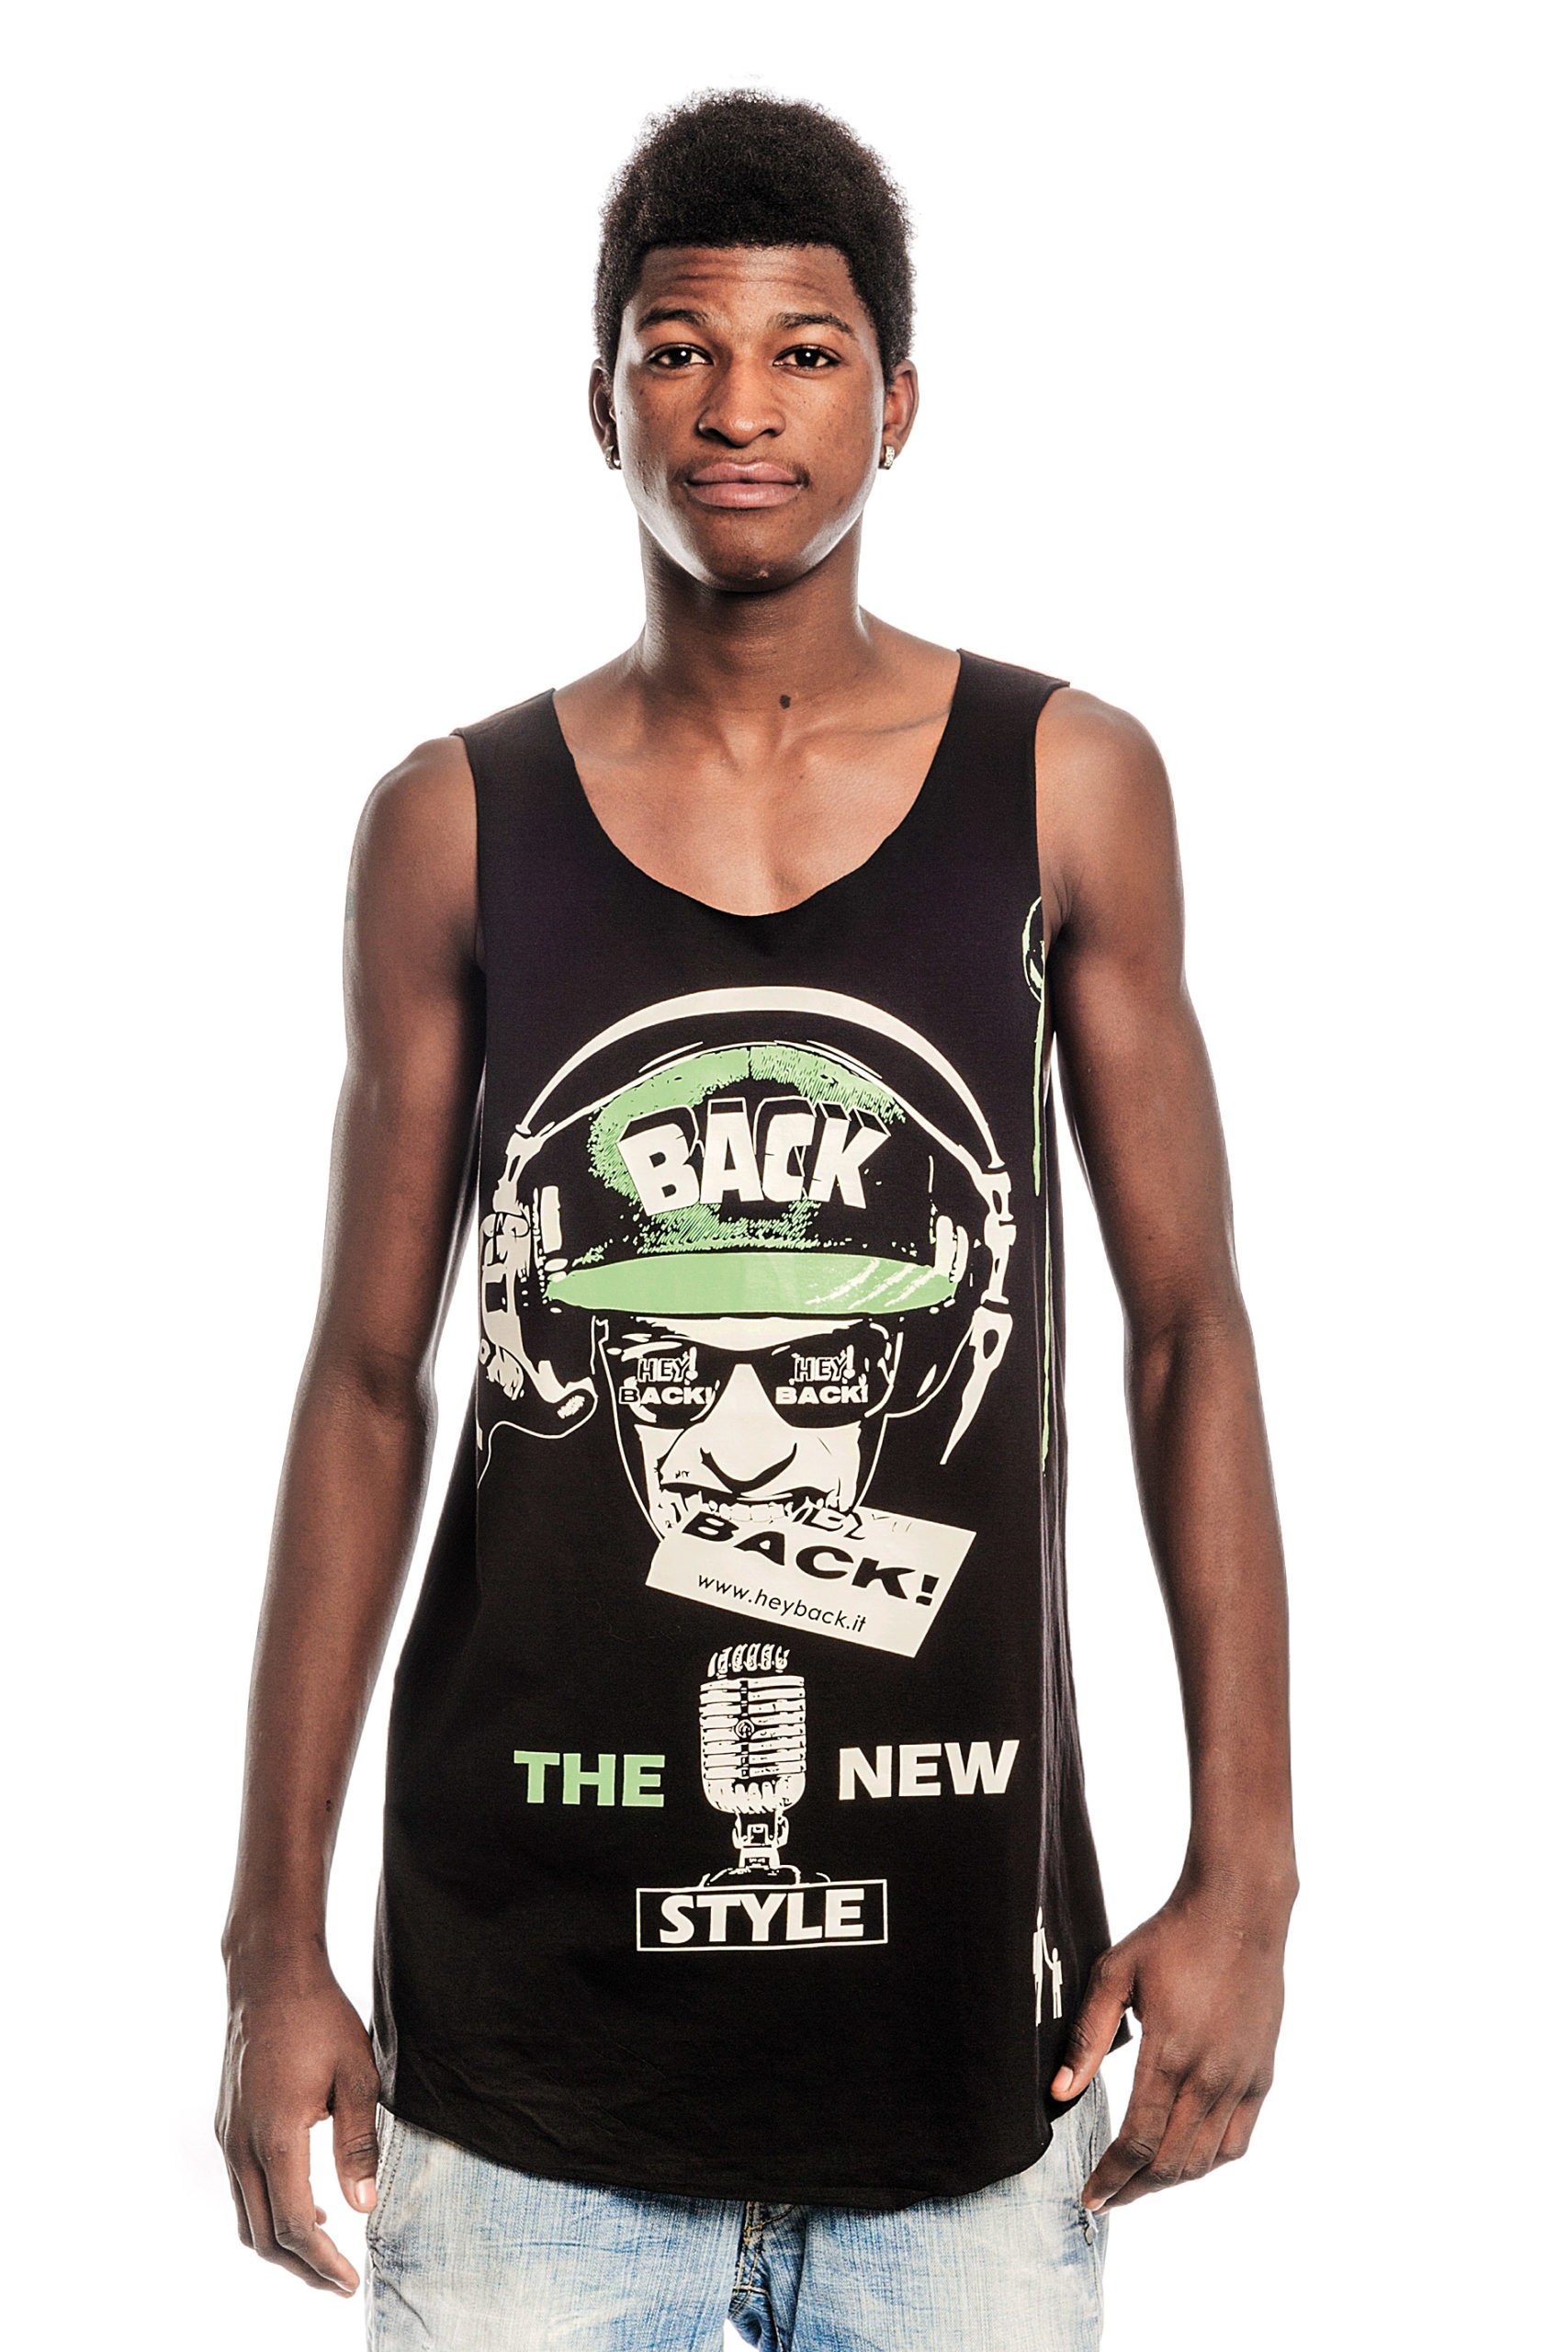 TANK TOP BLACK THE NEW STYLE HEY! BACK! SUMMER COLLECTION –